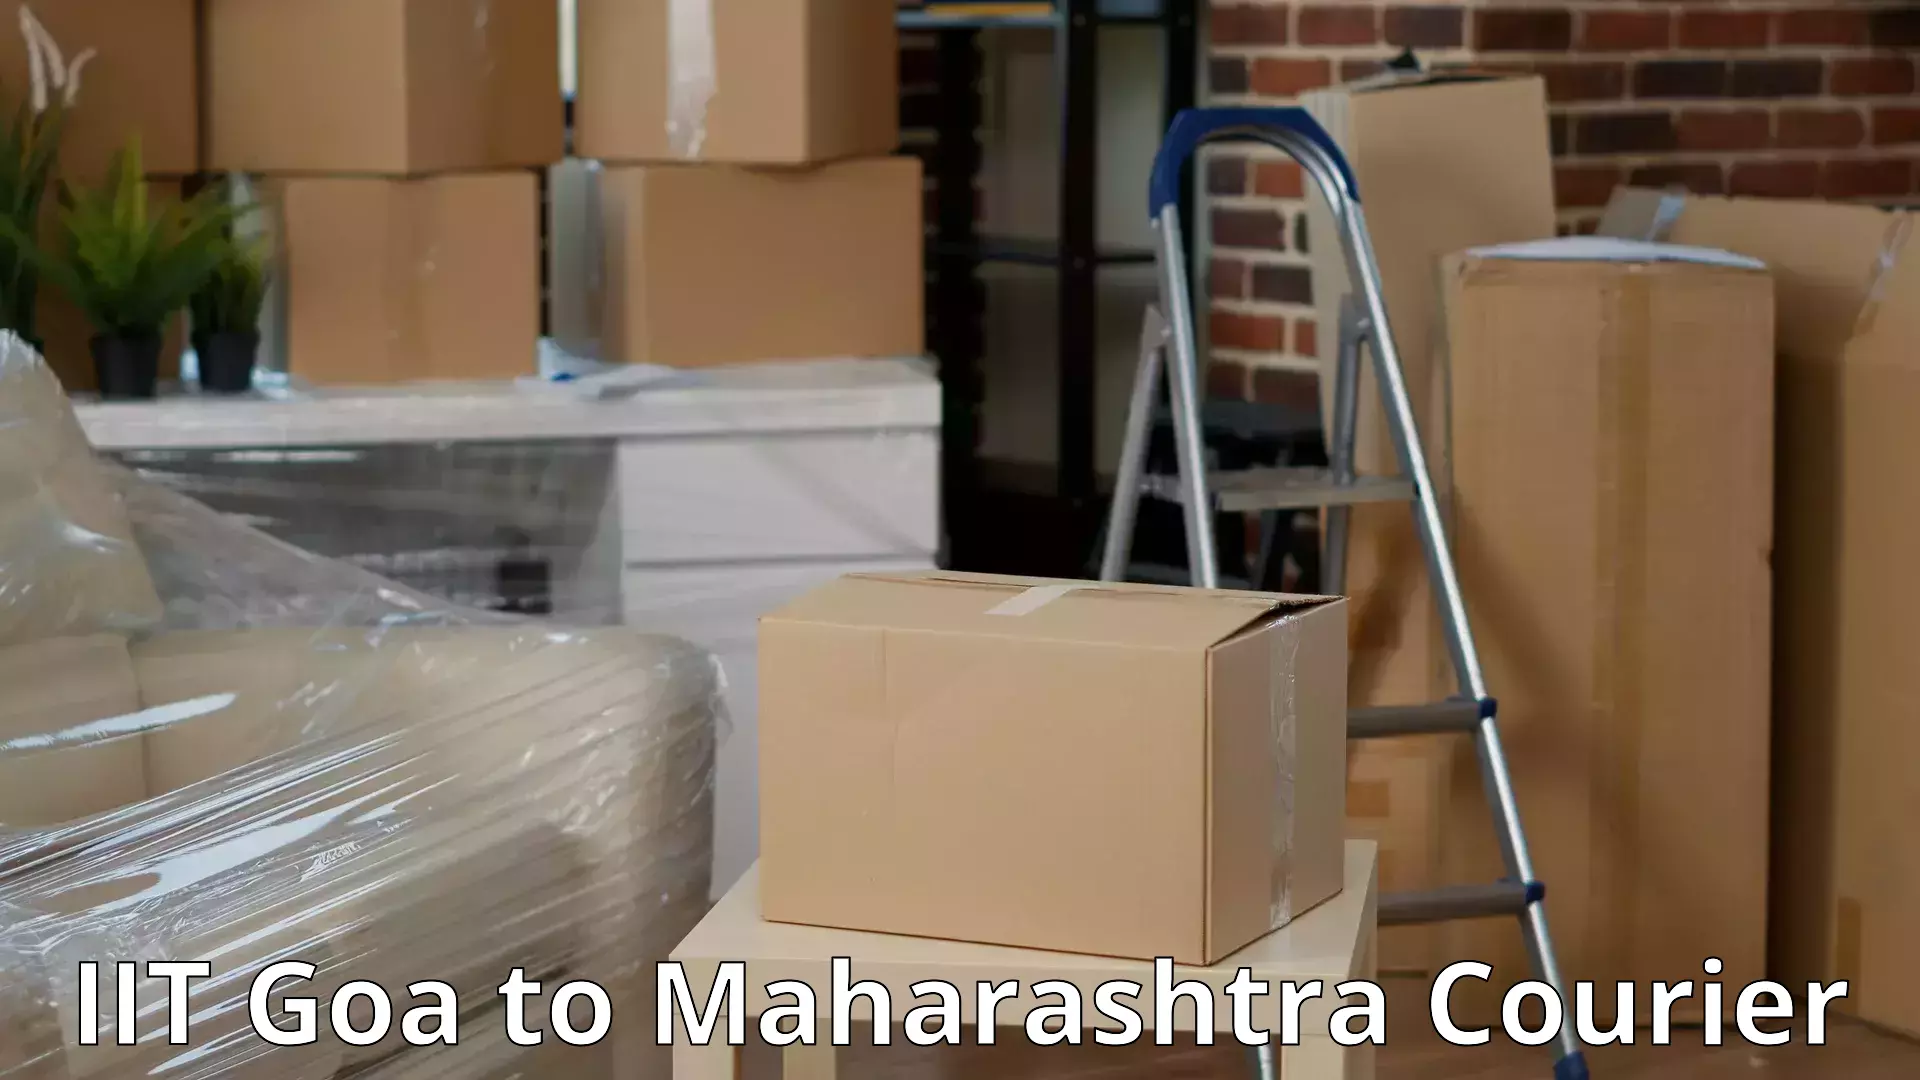 Budget-friendly moving services IIT Goa to Osmanabad